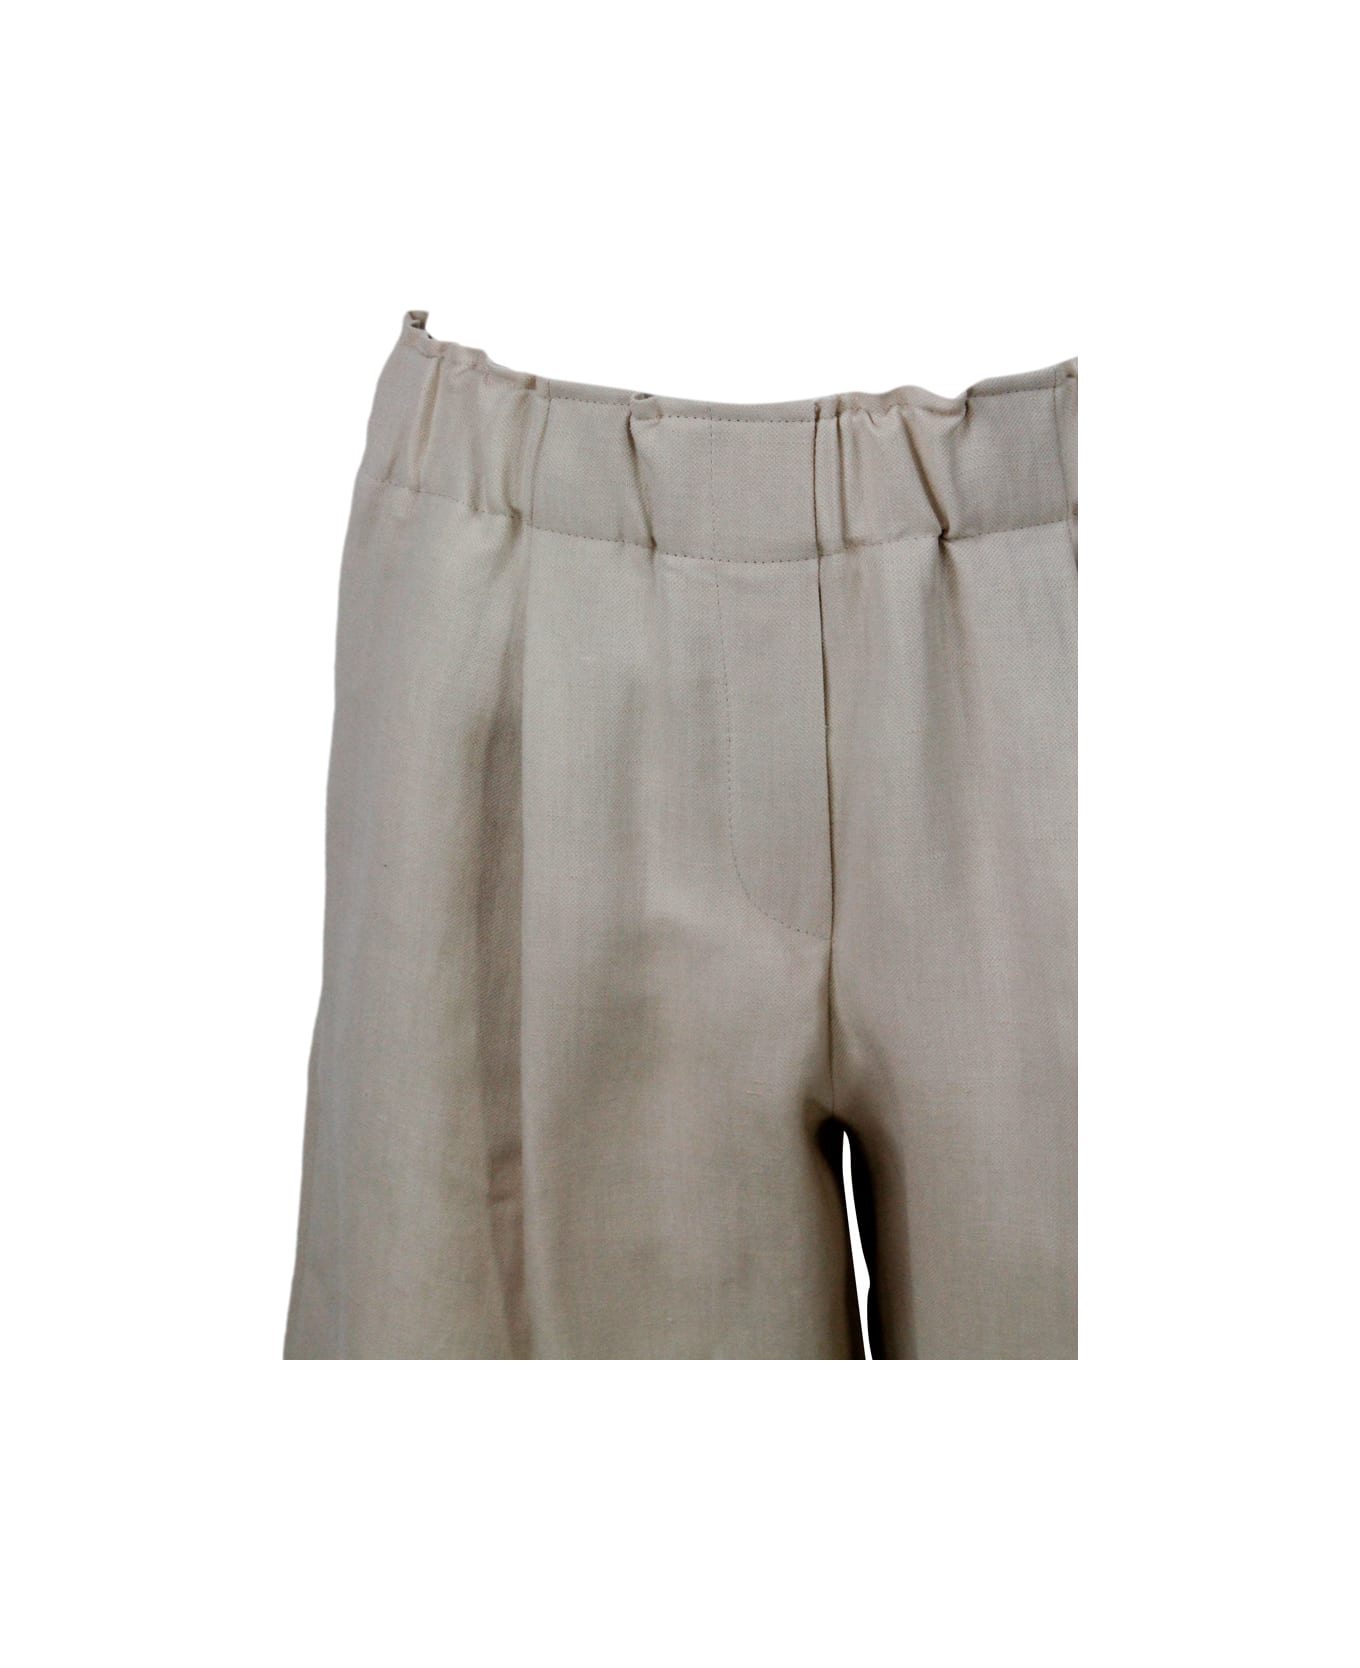 Antonelli Knee-length Bermuda Shorts In Linen Blend With Small Darts And Elasticated Waist - Beige